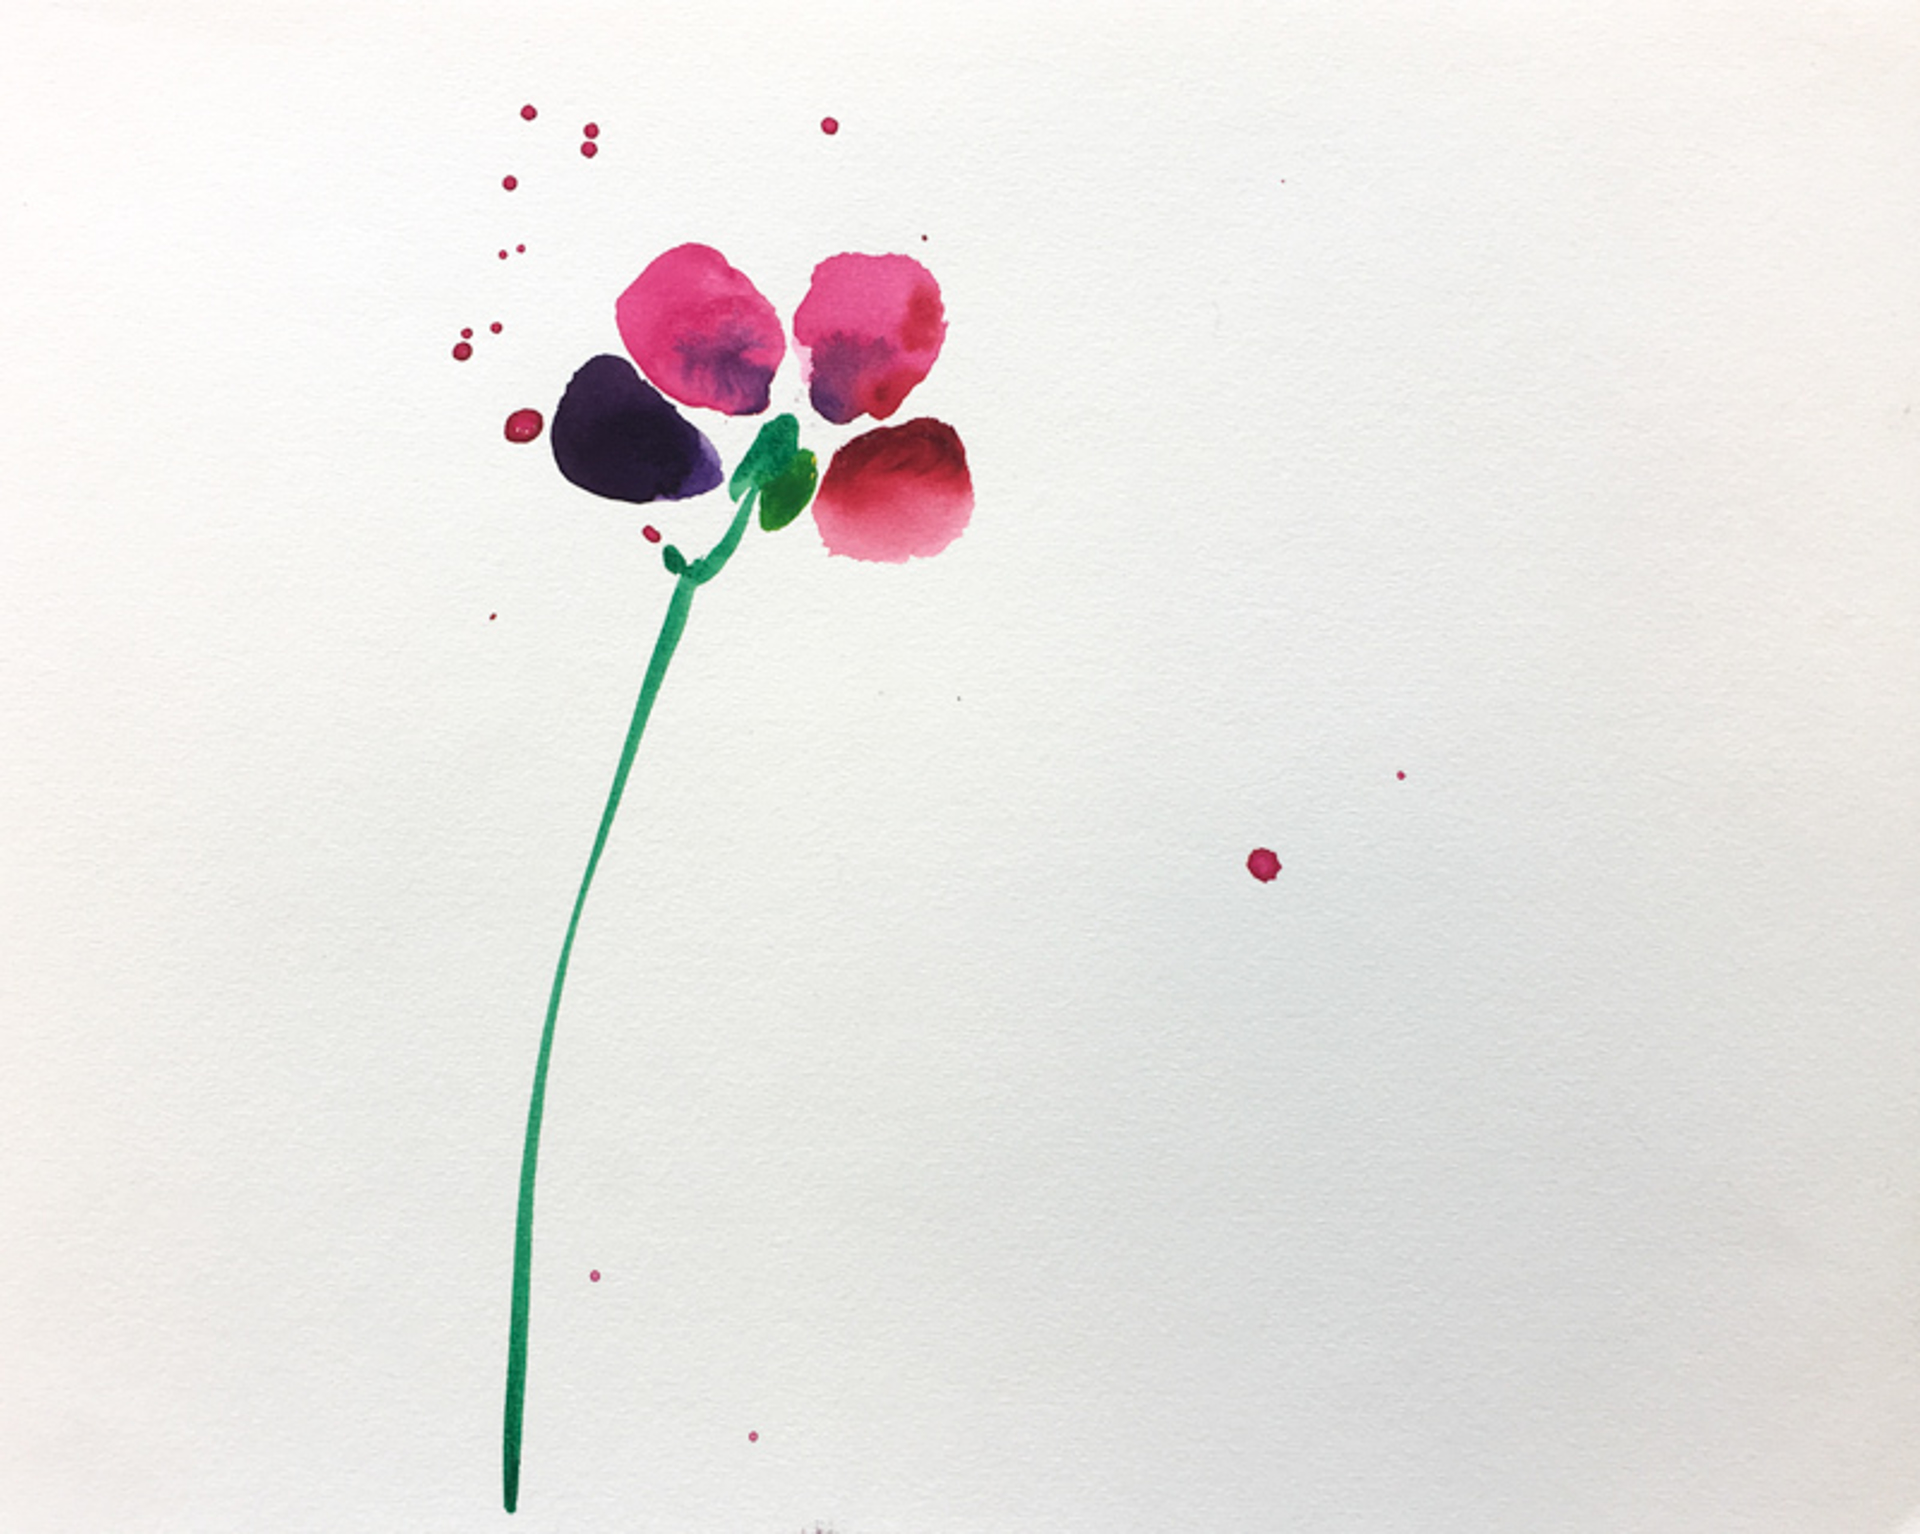 Floral Watercolor No. 11 by Christian Rothmann